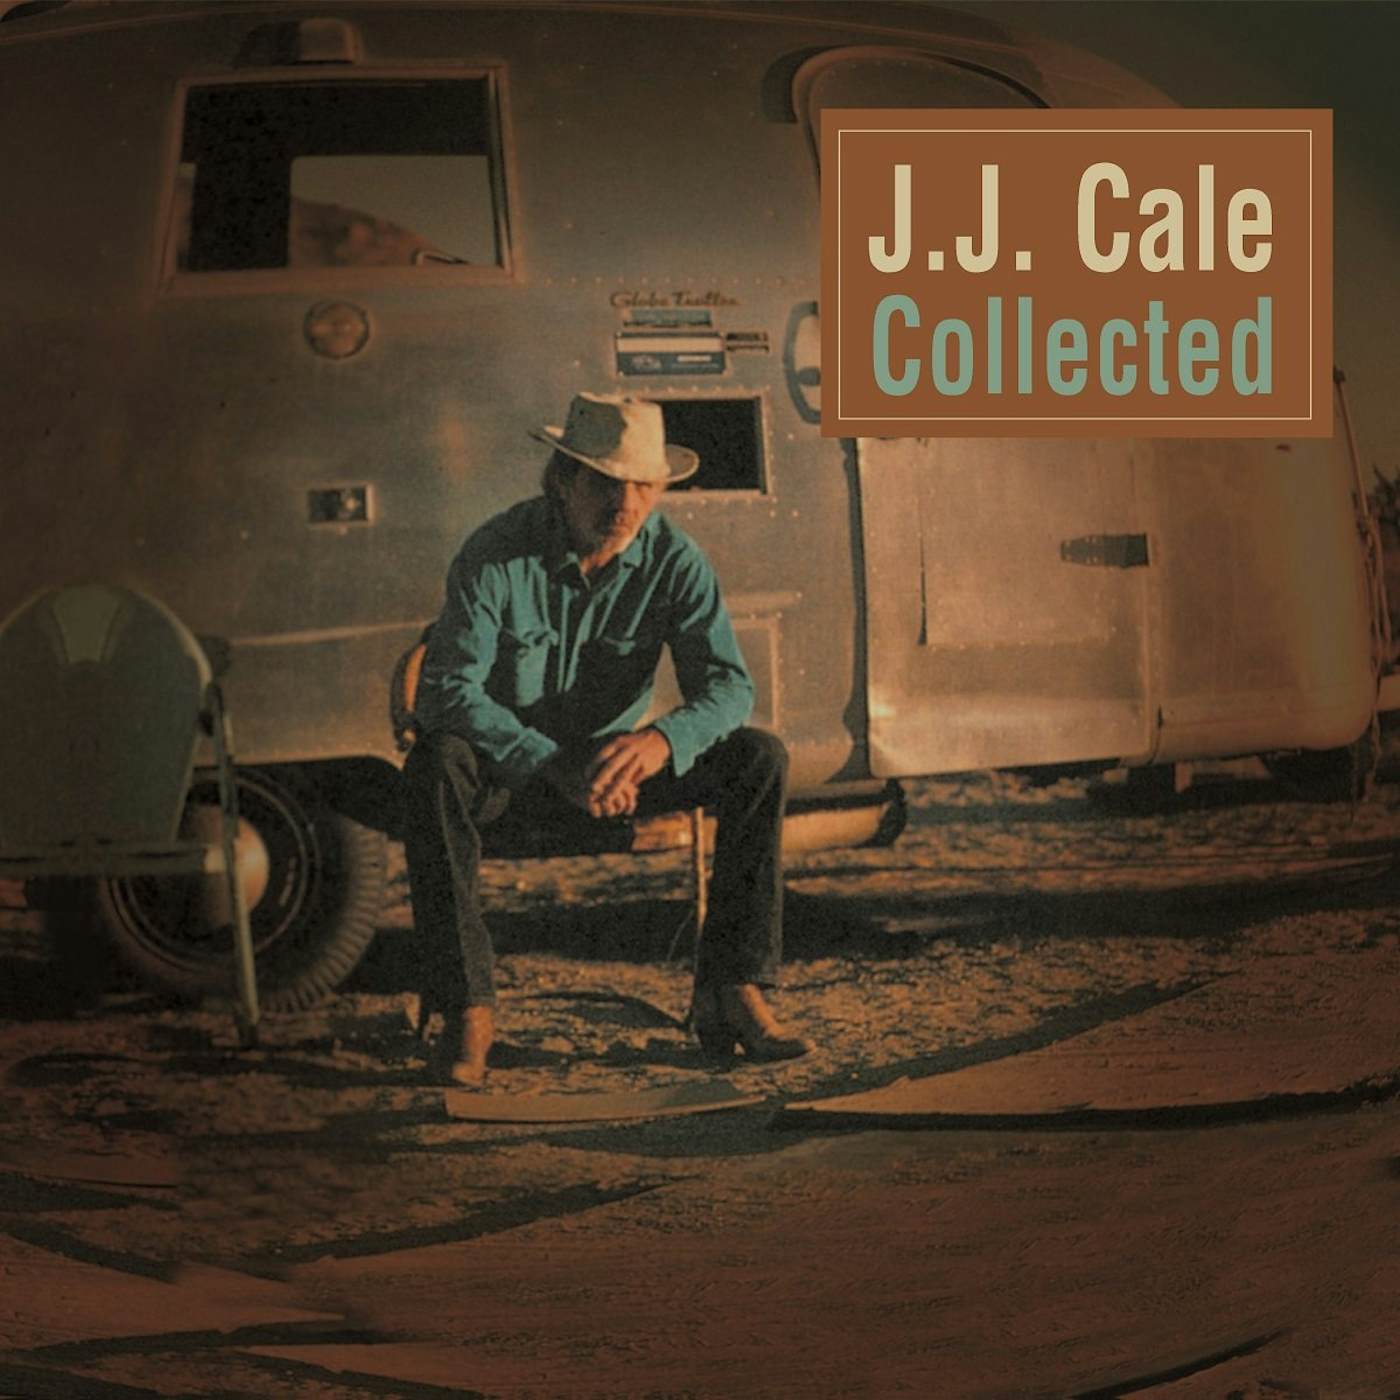 J.J. Cale Collected Vinyl Record